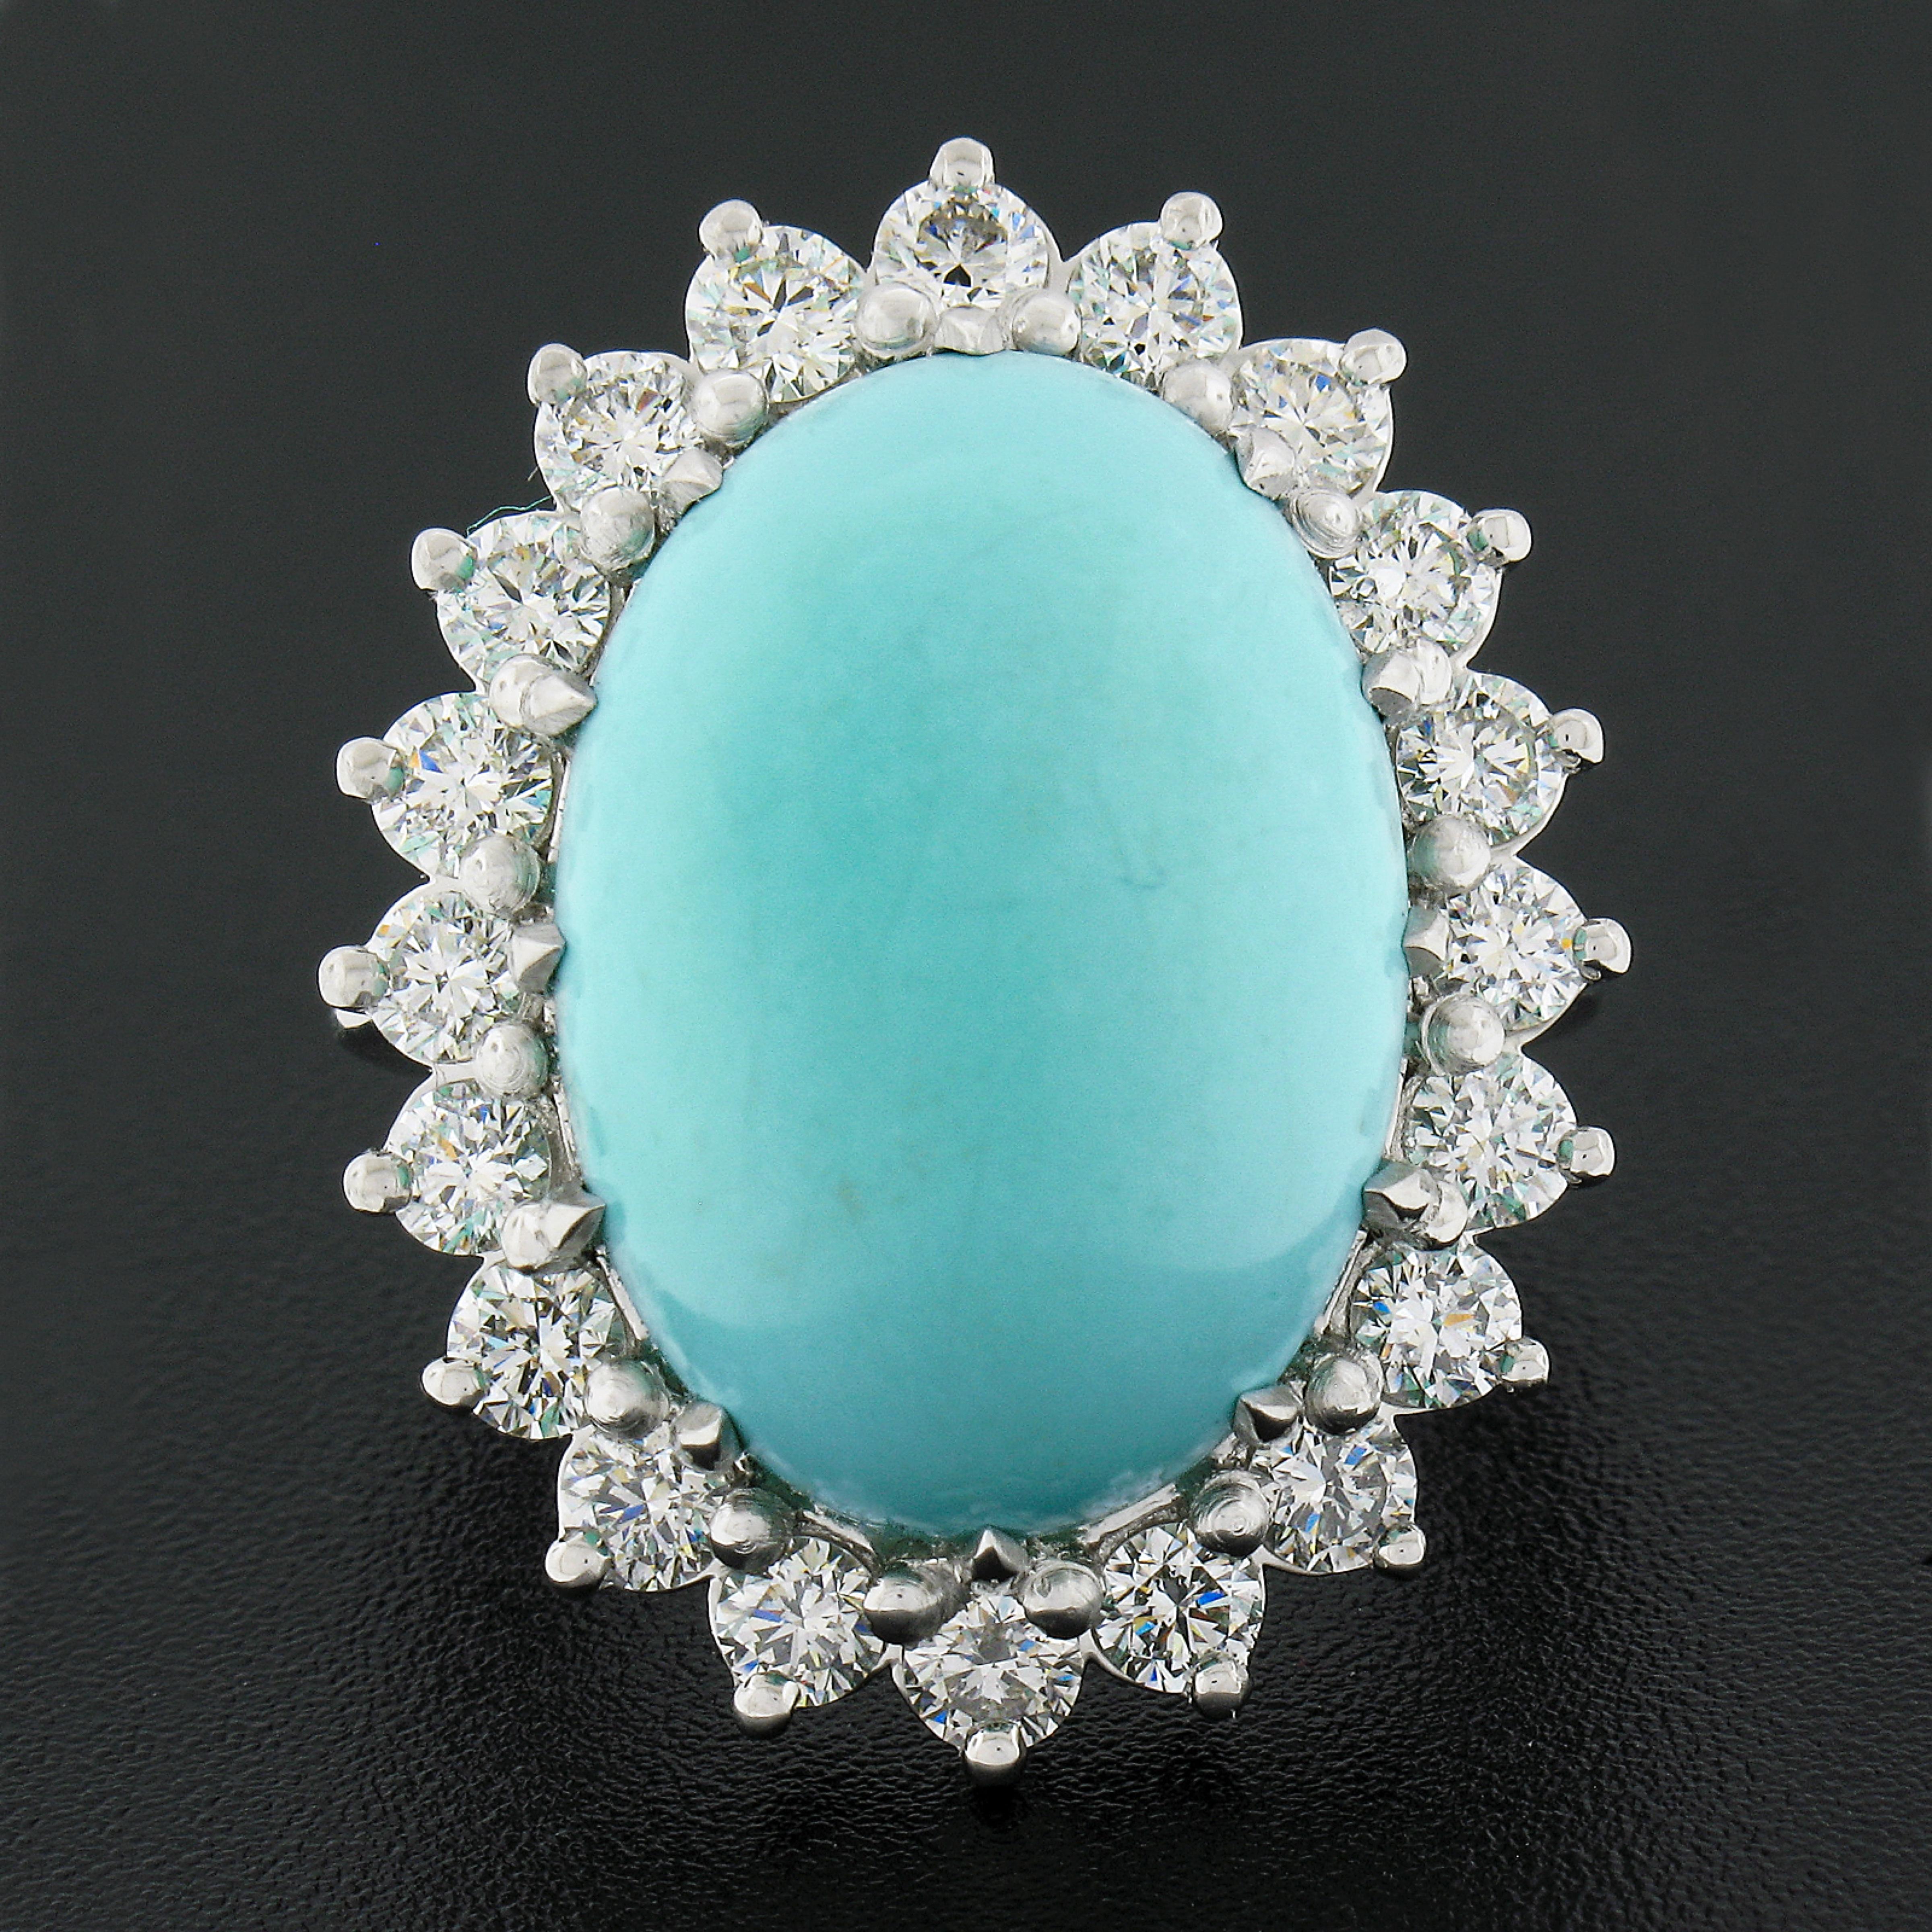 This magnificent, large, and fancy cocktail ring is newly crafted in solid platinum and features a breathtaking natural turquoise stone neatly set with multiple sturdy prongs at the center of super lively diamond halo design. The turquoise displays